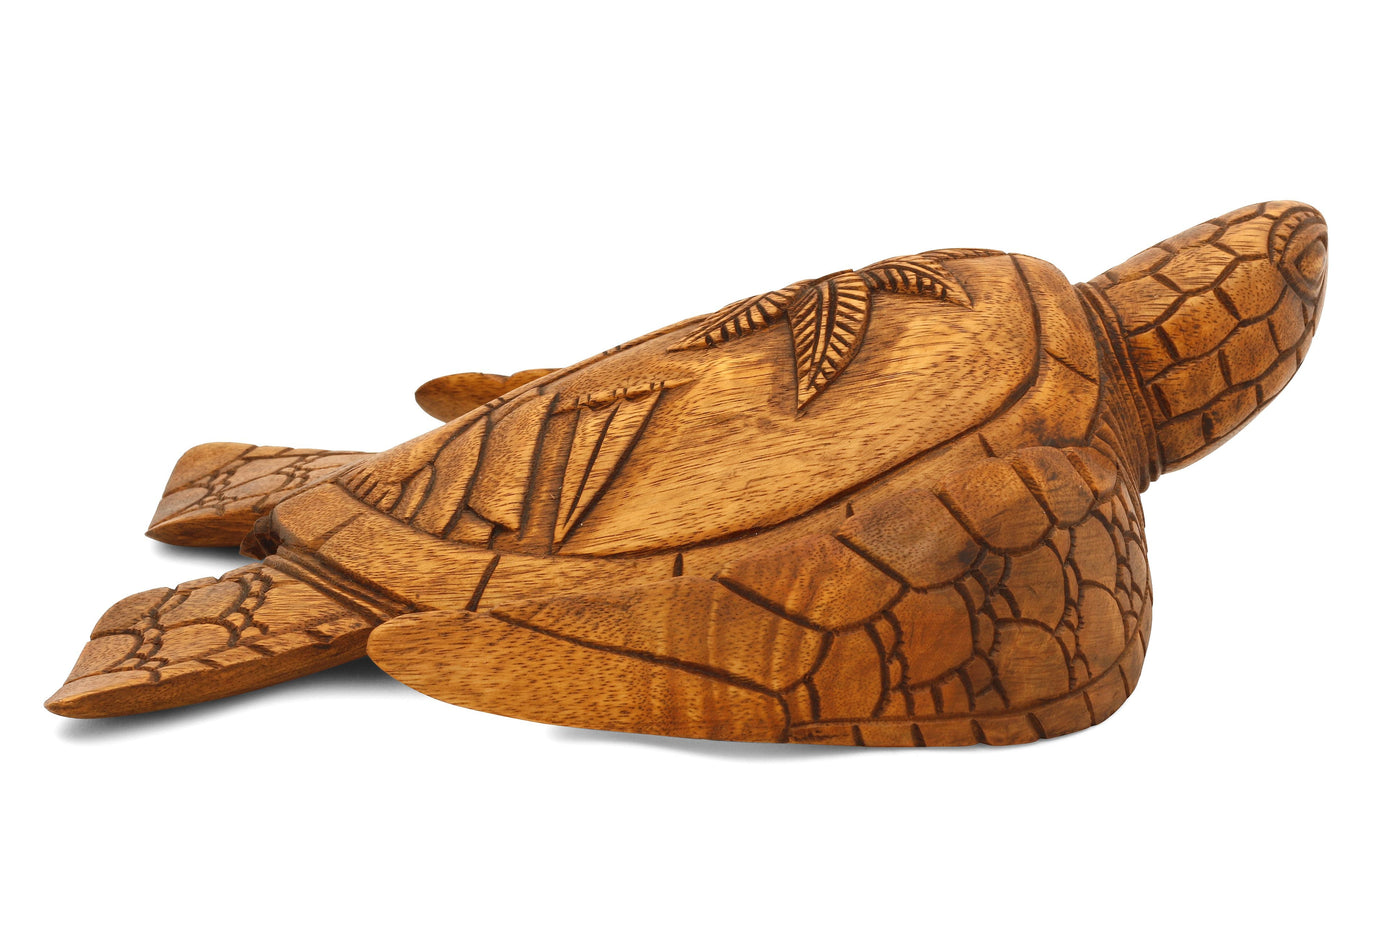 12" Long Wooden Hand Carved Turtle Tortoise Statue Figurine Sculpture Handcrafted Handmade Home Decor Accent Seaside Tropical Nautical Ocean Coastal